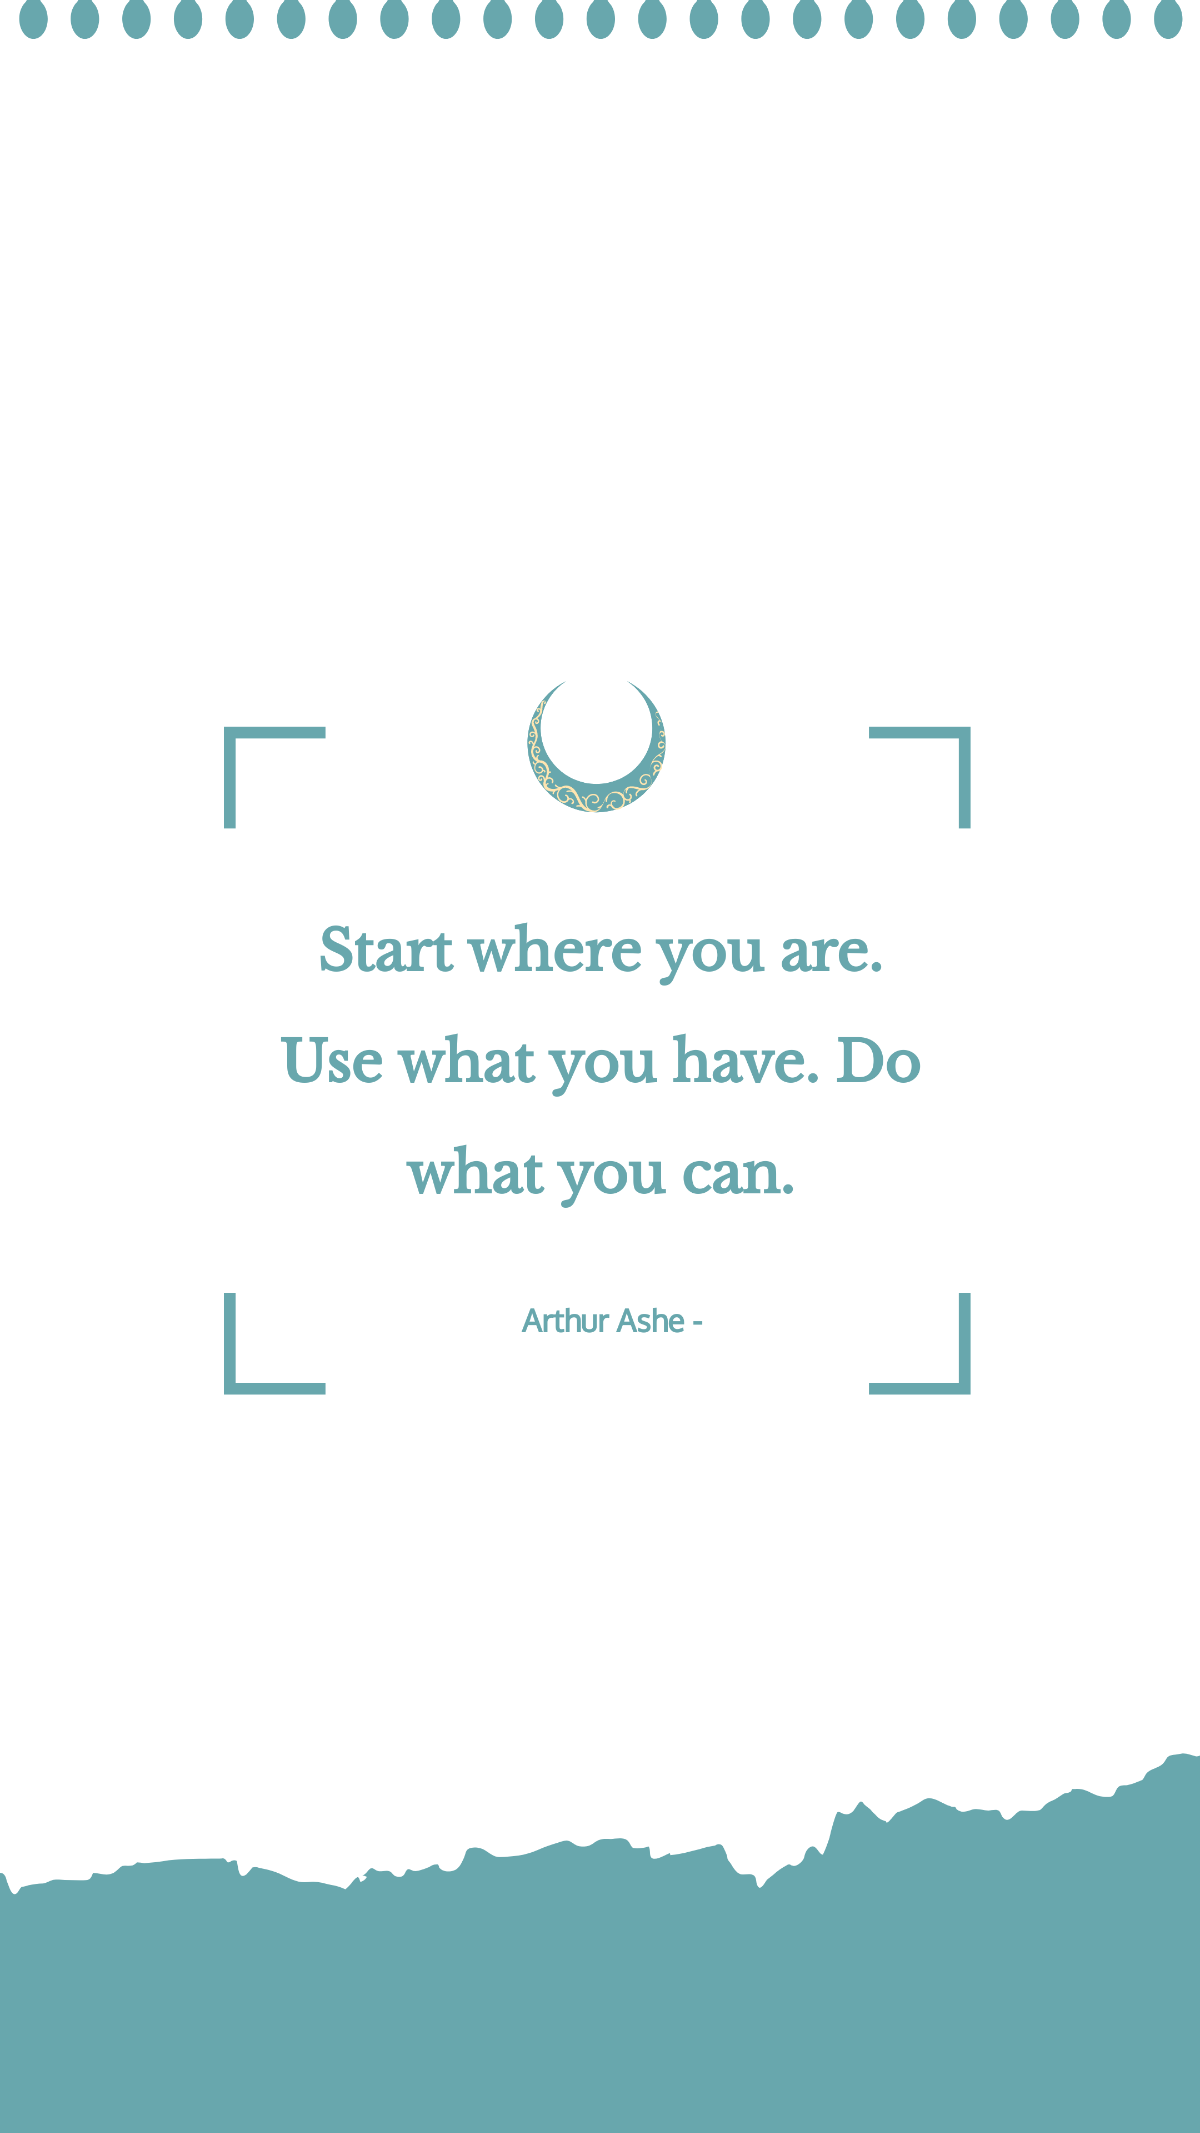 Free Arthur Ashe - Start where you are. Use what you have. Do what you can. Template